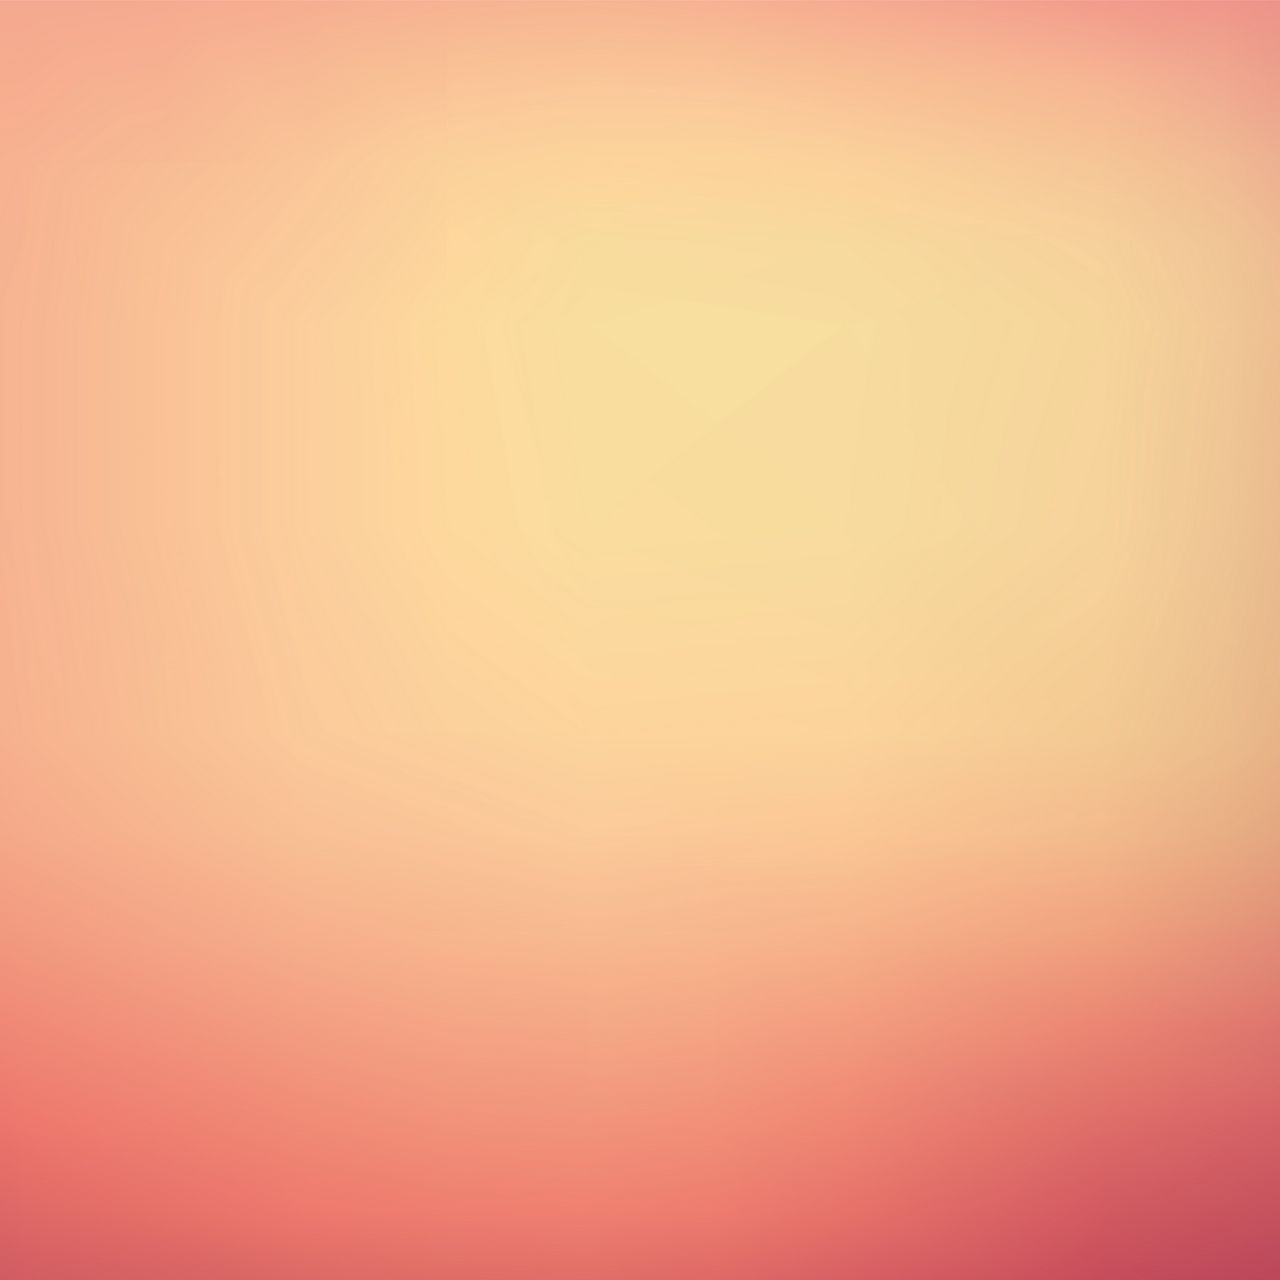 Download wallpaper 1280x1280 gradient, pink, shades, background, color,  delicate ipad, ipad 2, ipad mini for parallax hd background